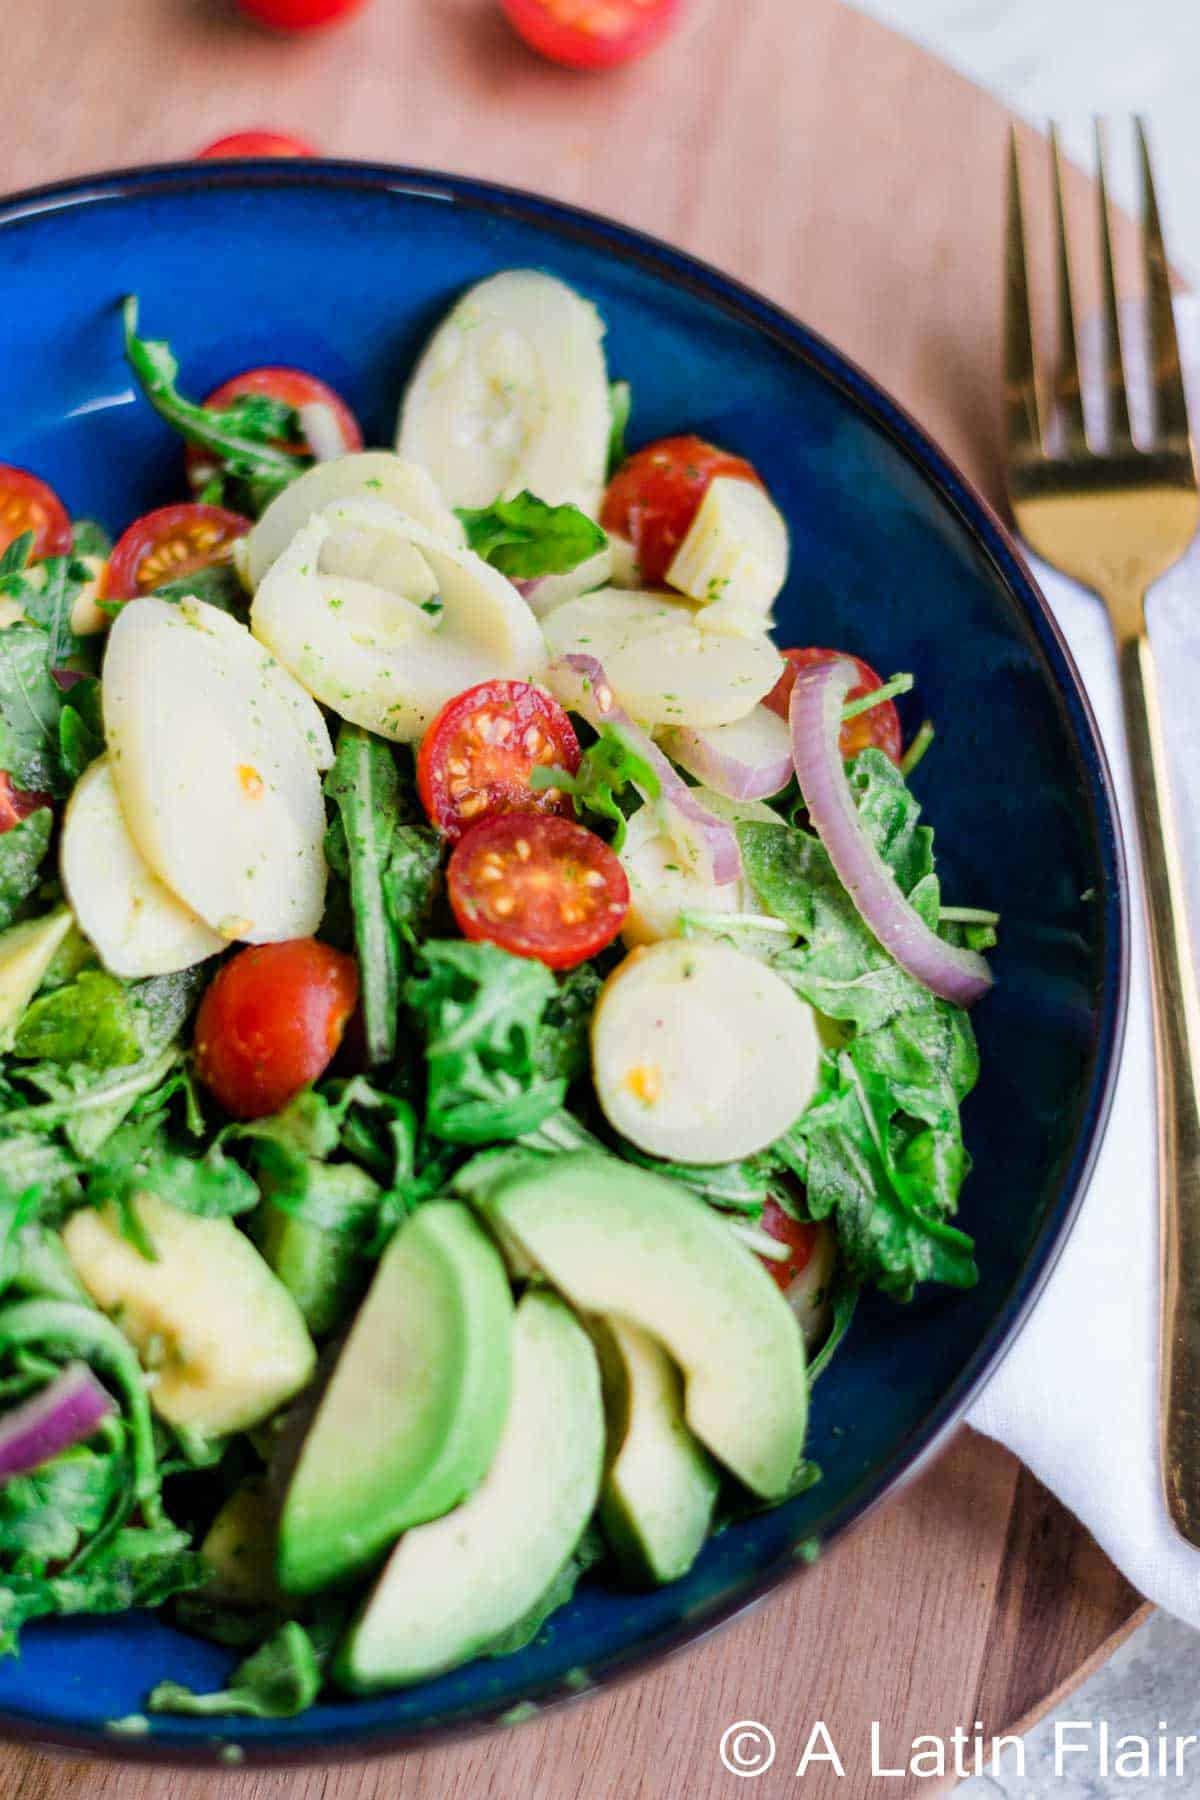 hearts-of-palm-salad-with-vegan-avocado-dressing-in-blue-bowl-25